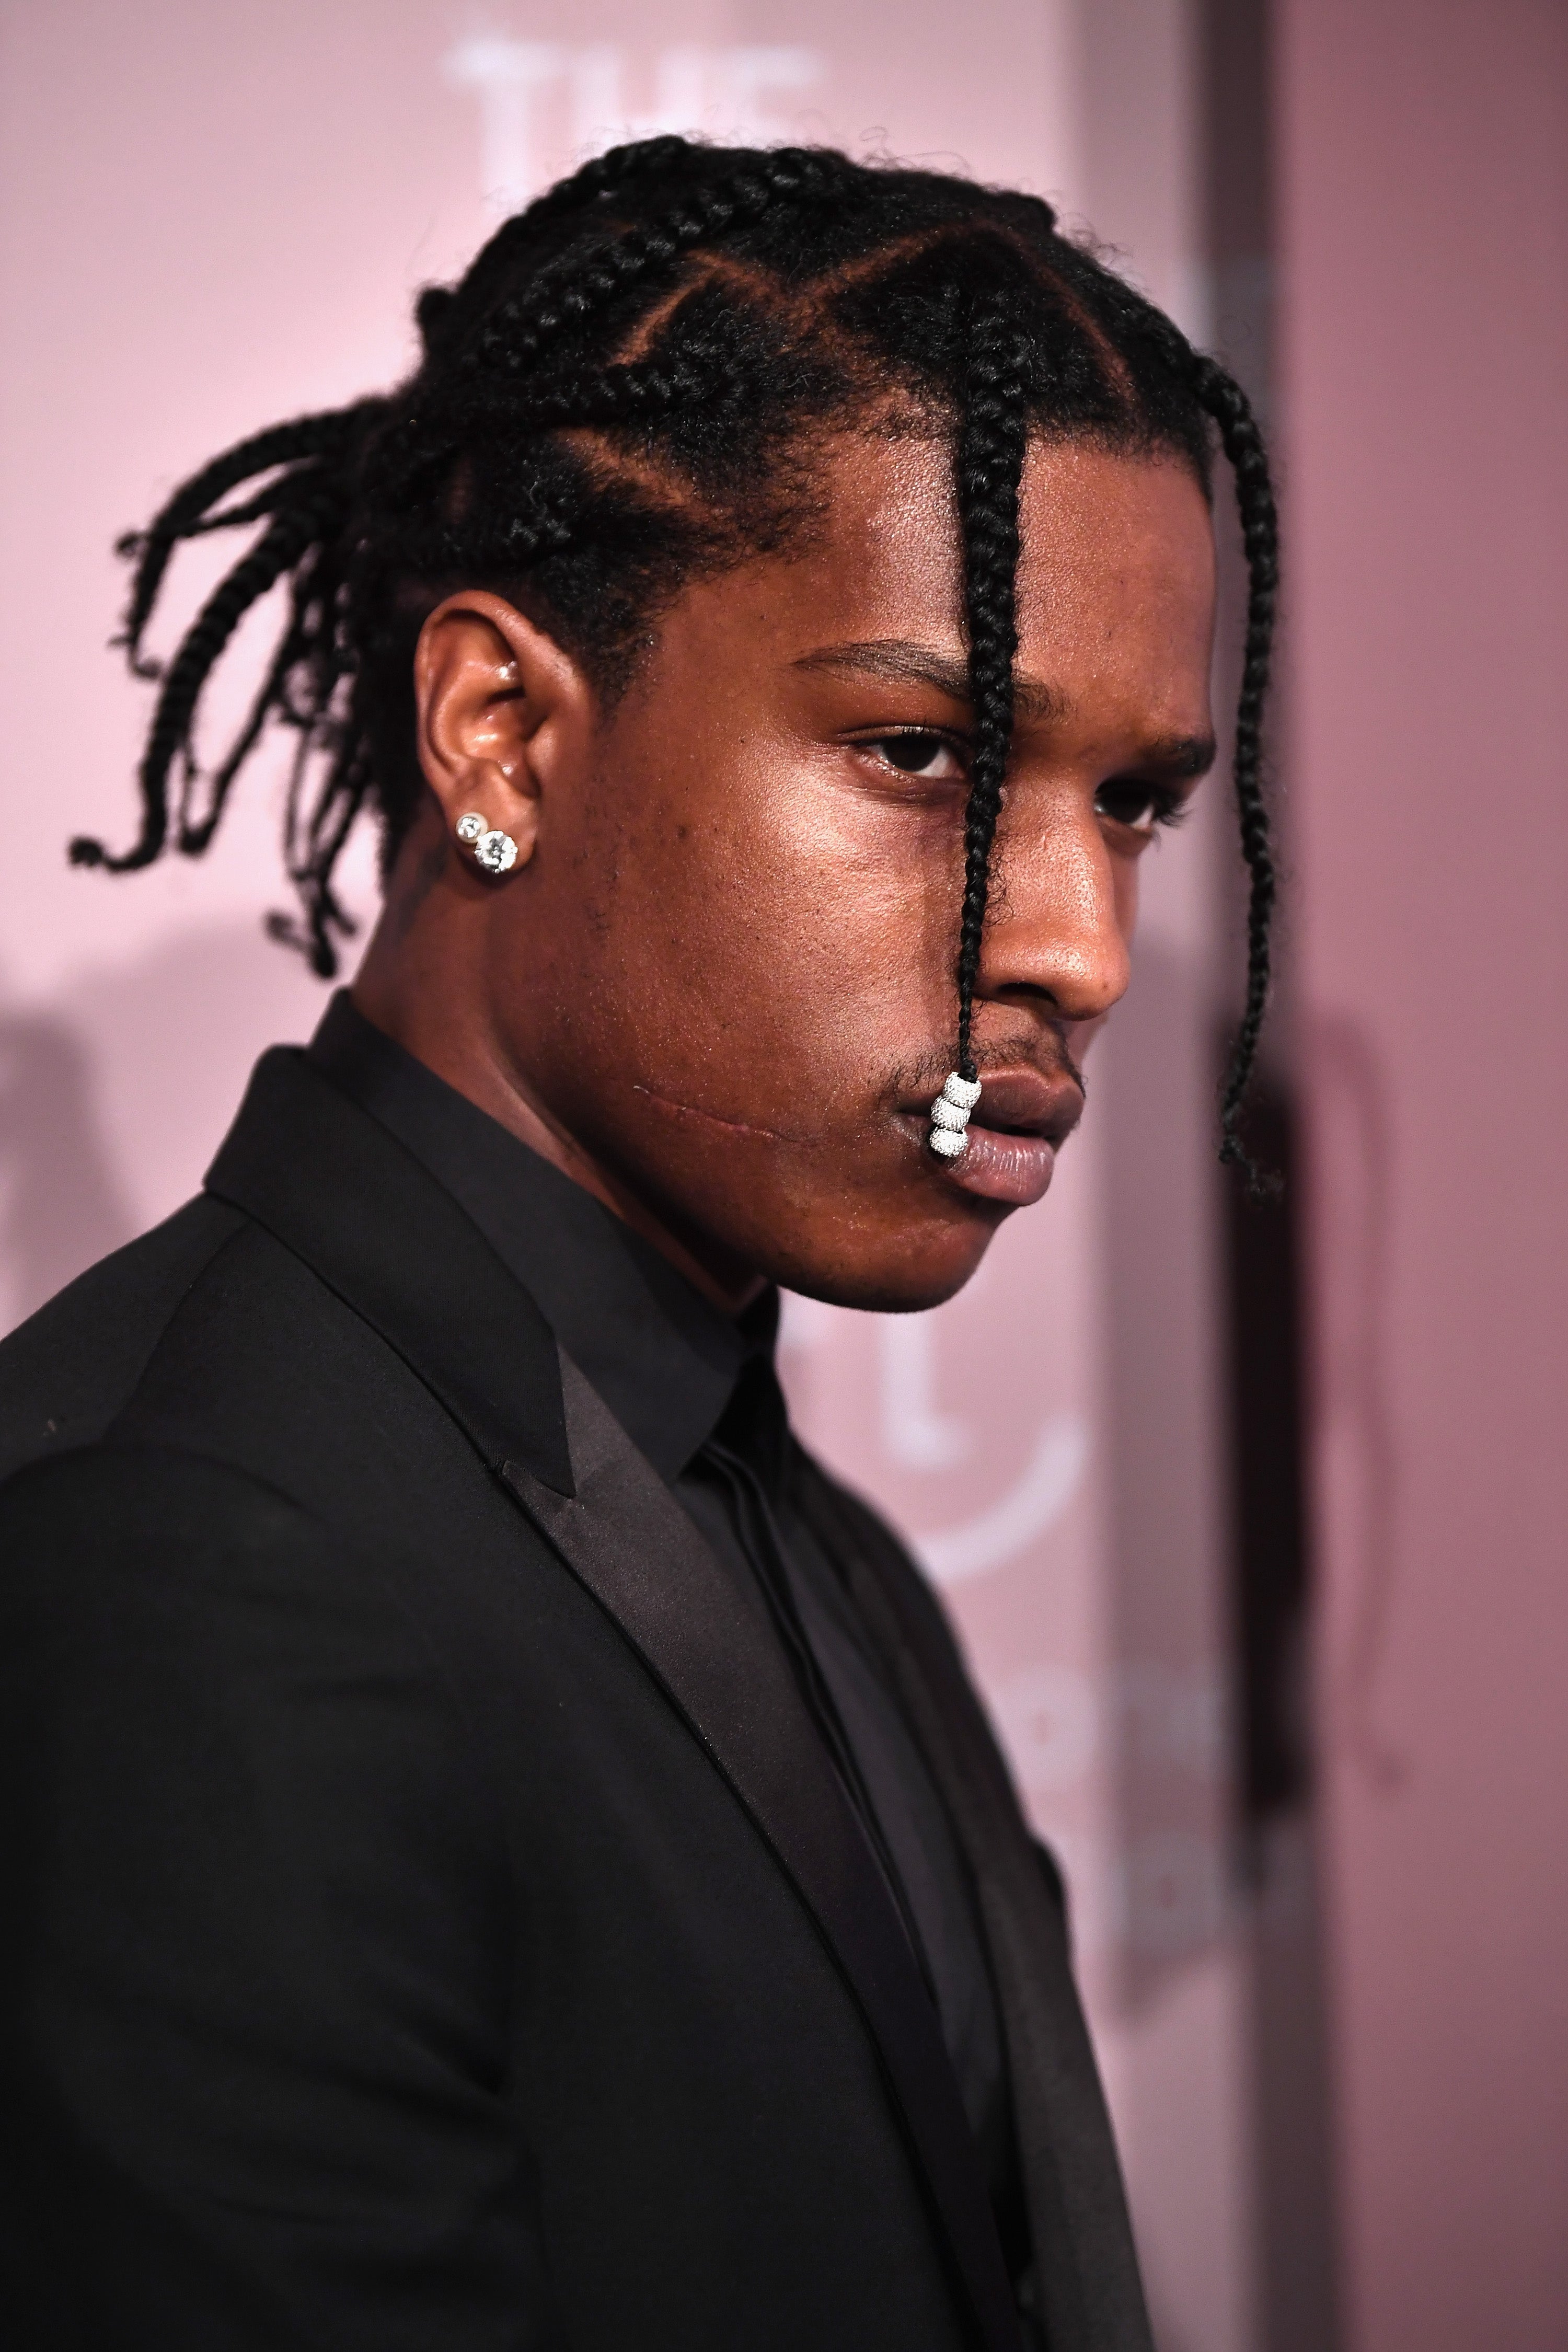 A$AP Rocky Adds His Touch Of Street Style To The End Of New York